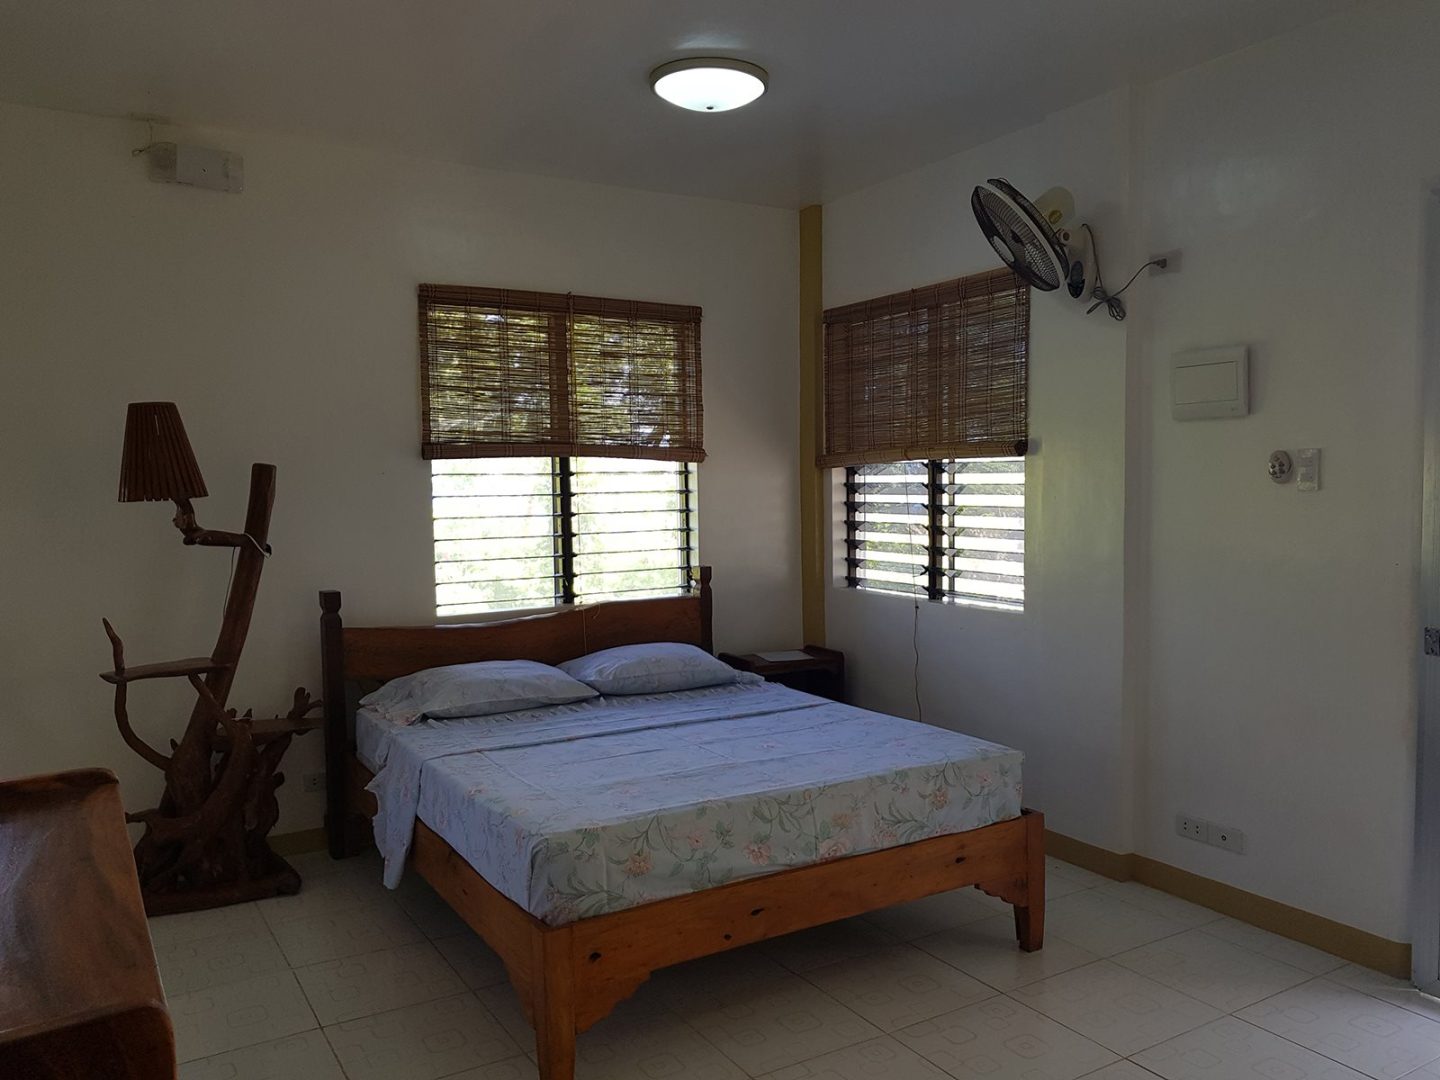 Pine 2 accommodation. Photo from Sea Turtle Lagoon Facebook page